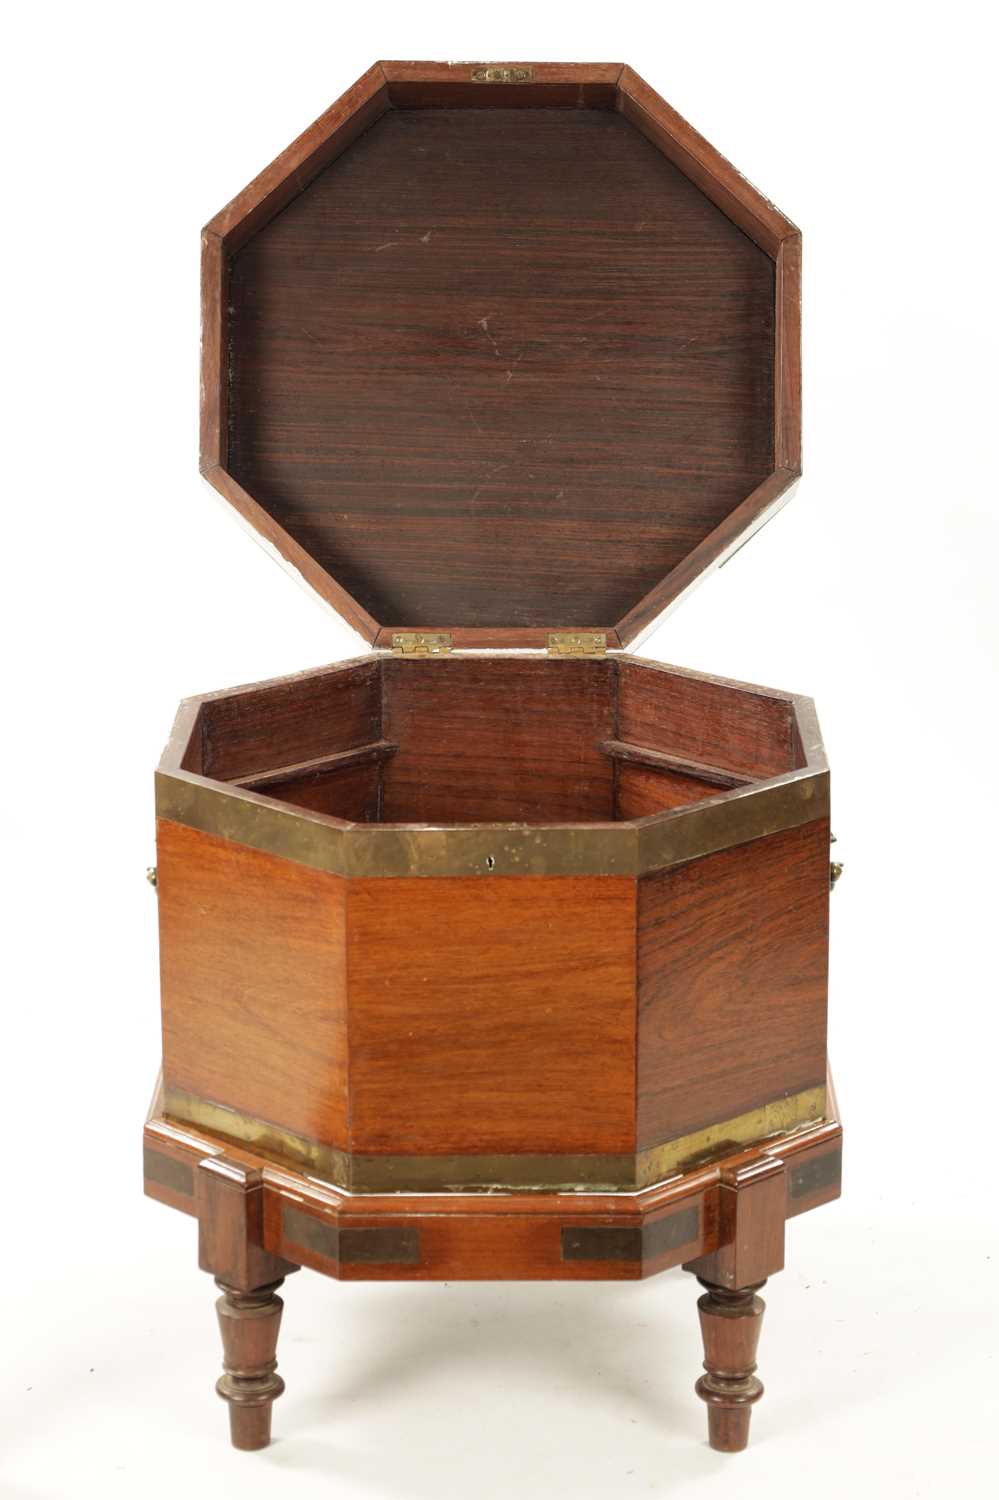 AN UNUSUAL 18TH CENTURY COLONIAL PADOUK OCTAGONAL SHAPED WINE COOLER ON STAND - Image 7 of 7